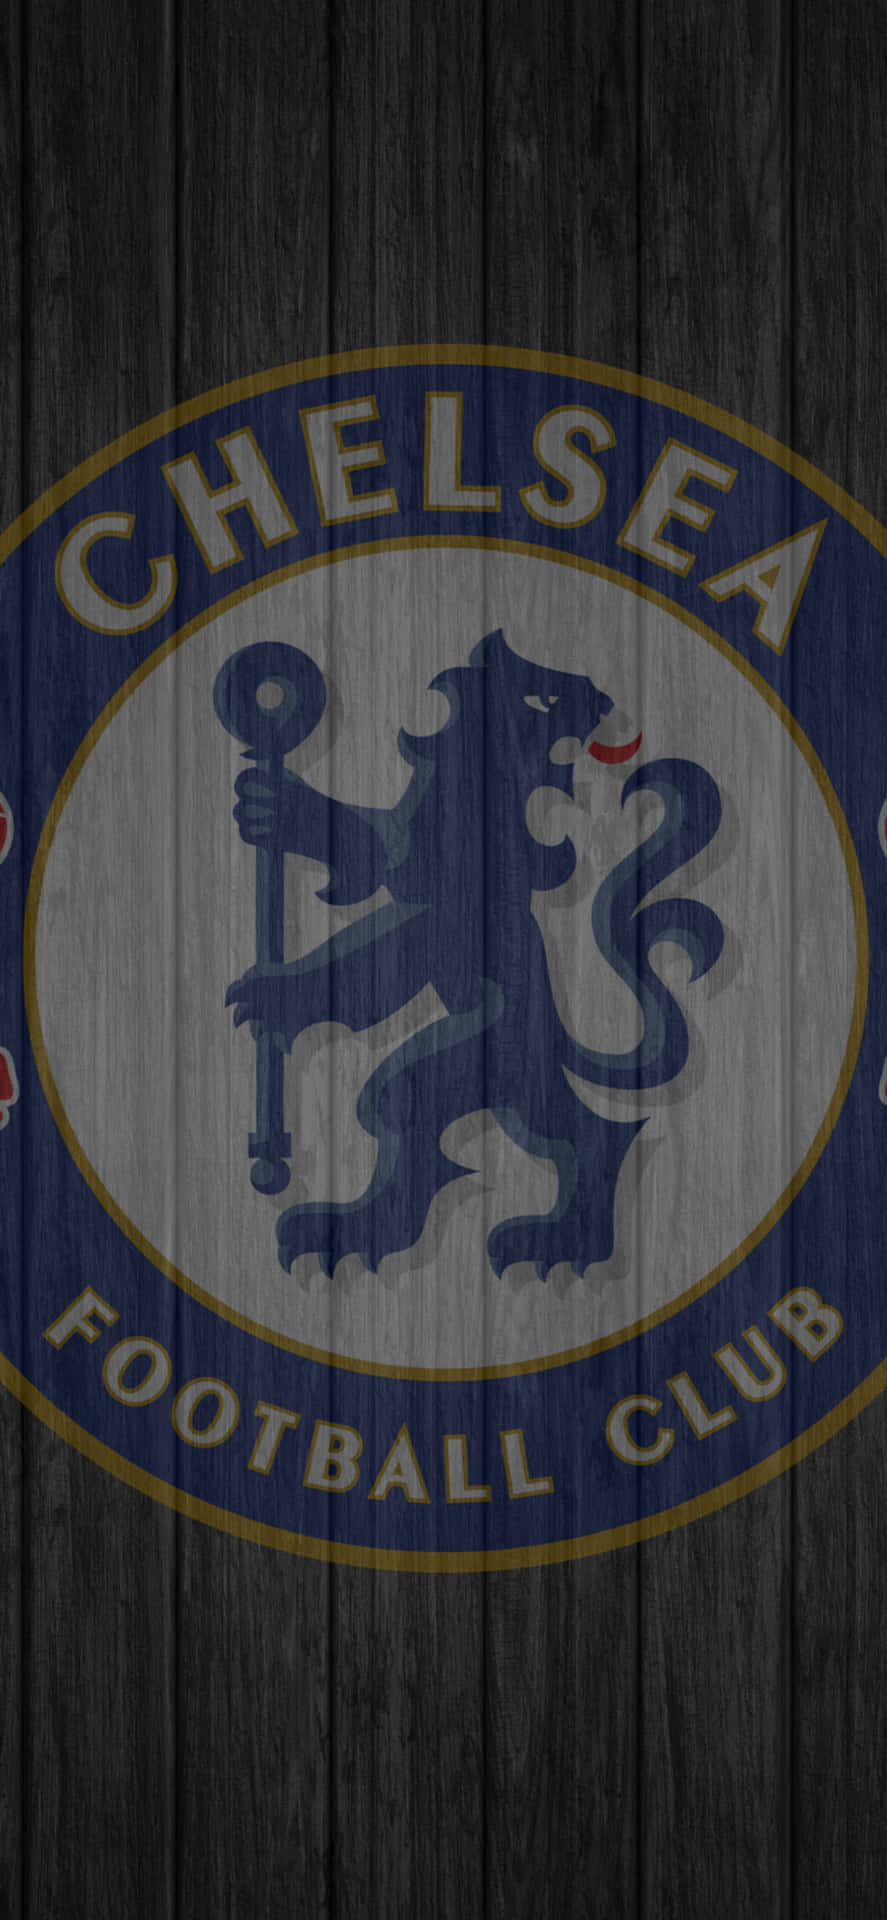 Get the latest Chelsea Football Club news with the Chelsea Iphone. Wallpaper